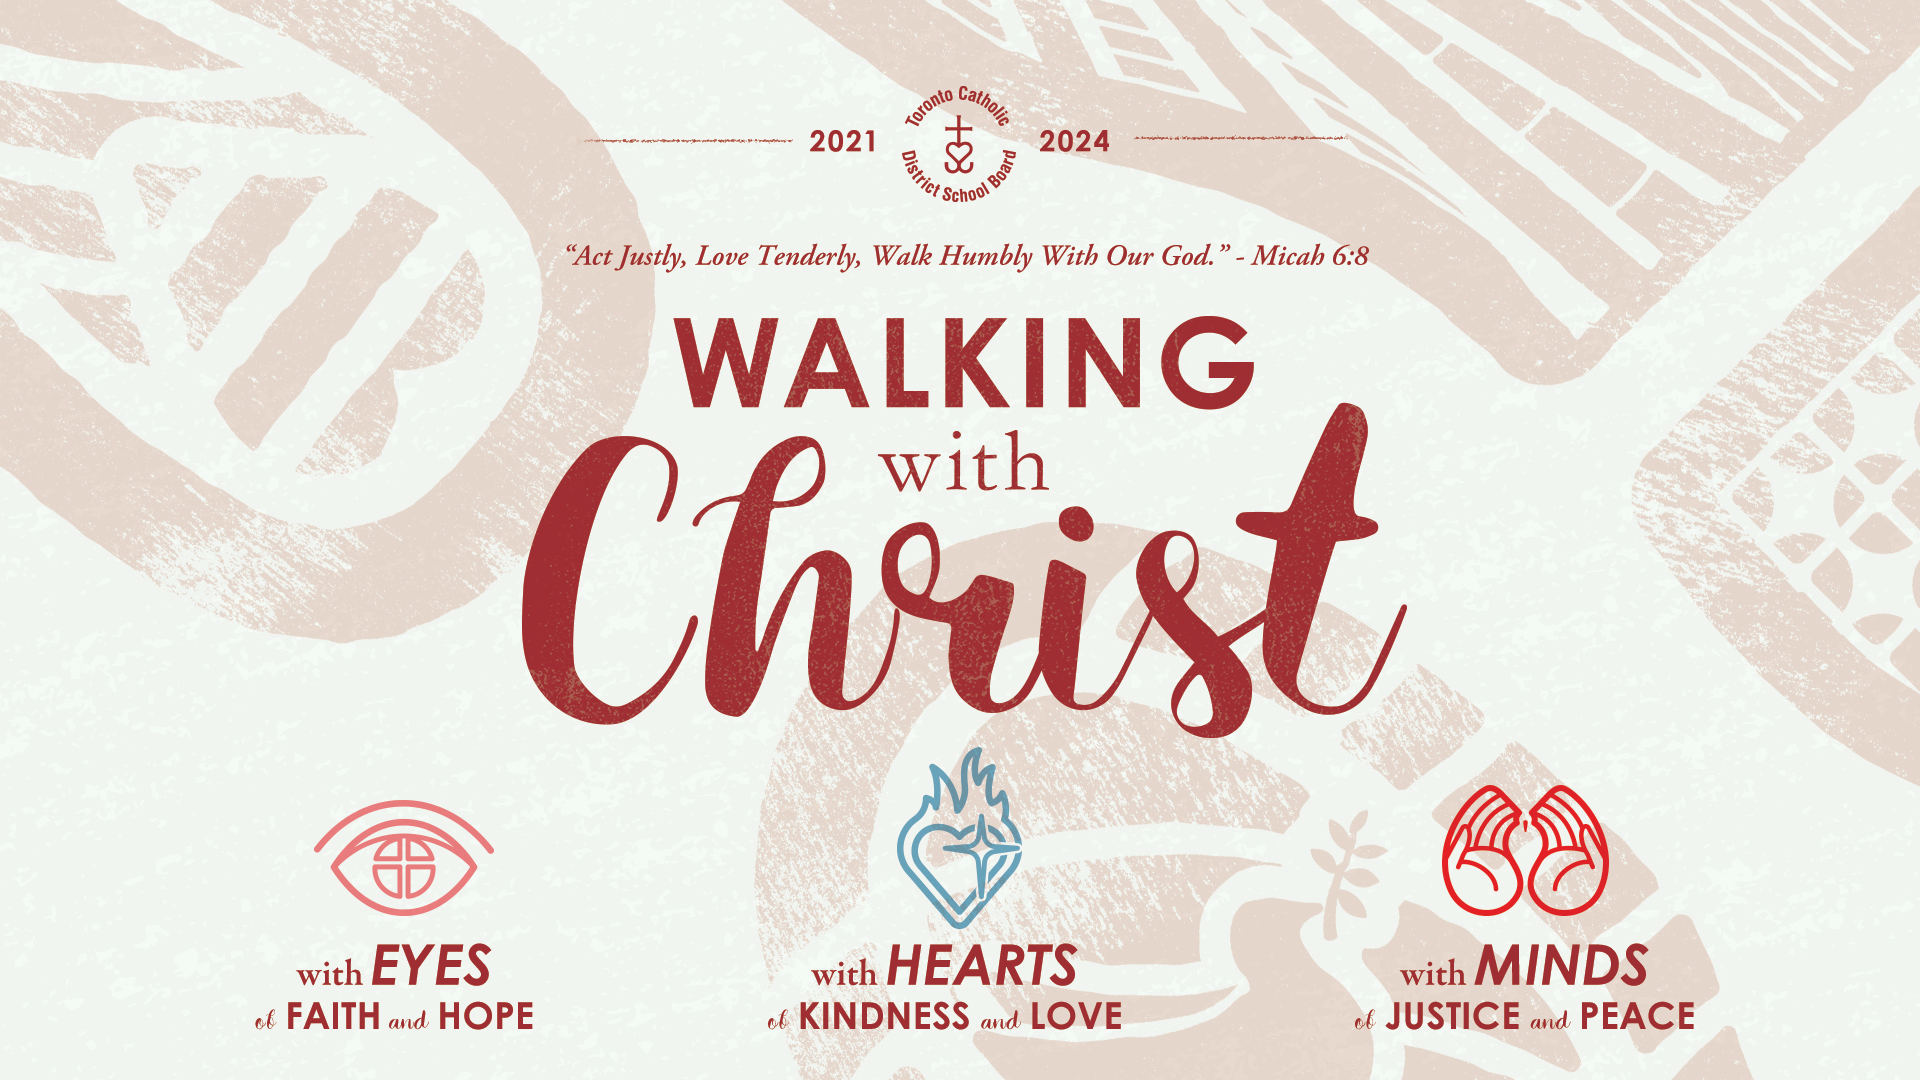 Walking with Christ (2021-2024) Poster: with eyes of faith and hope, with hearts of kindness and love, with minds of justice and peace.